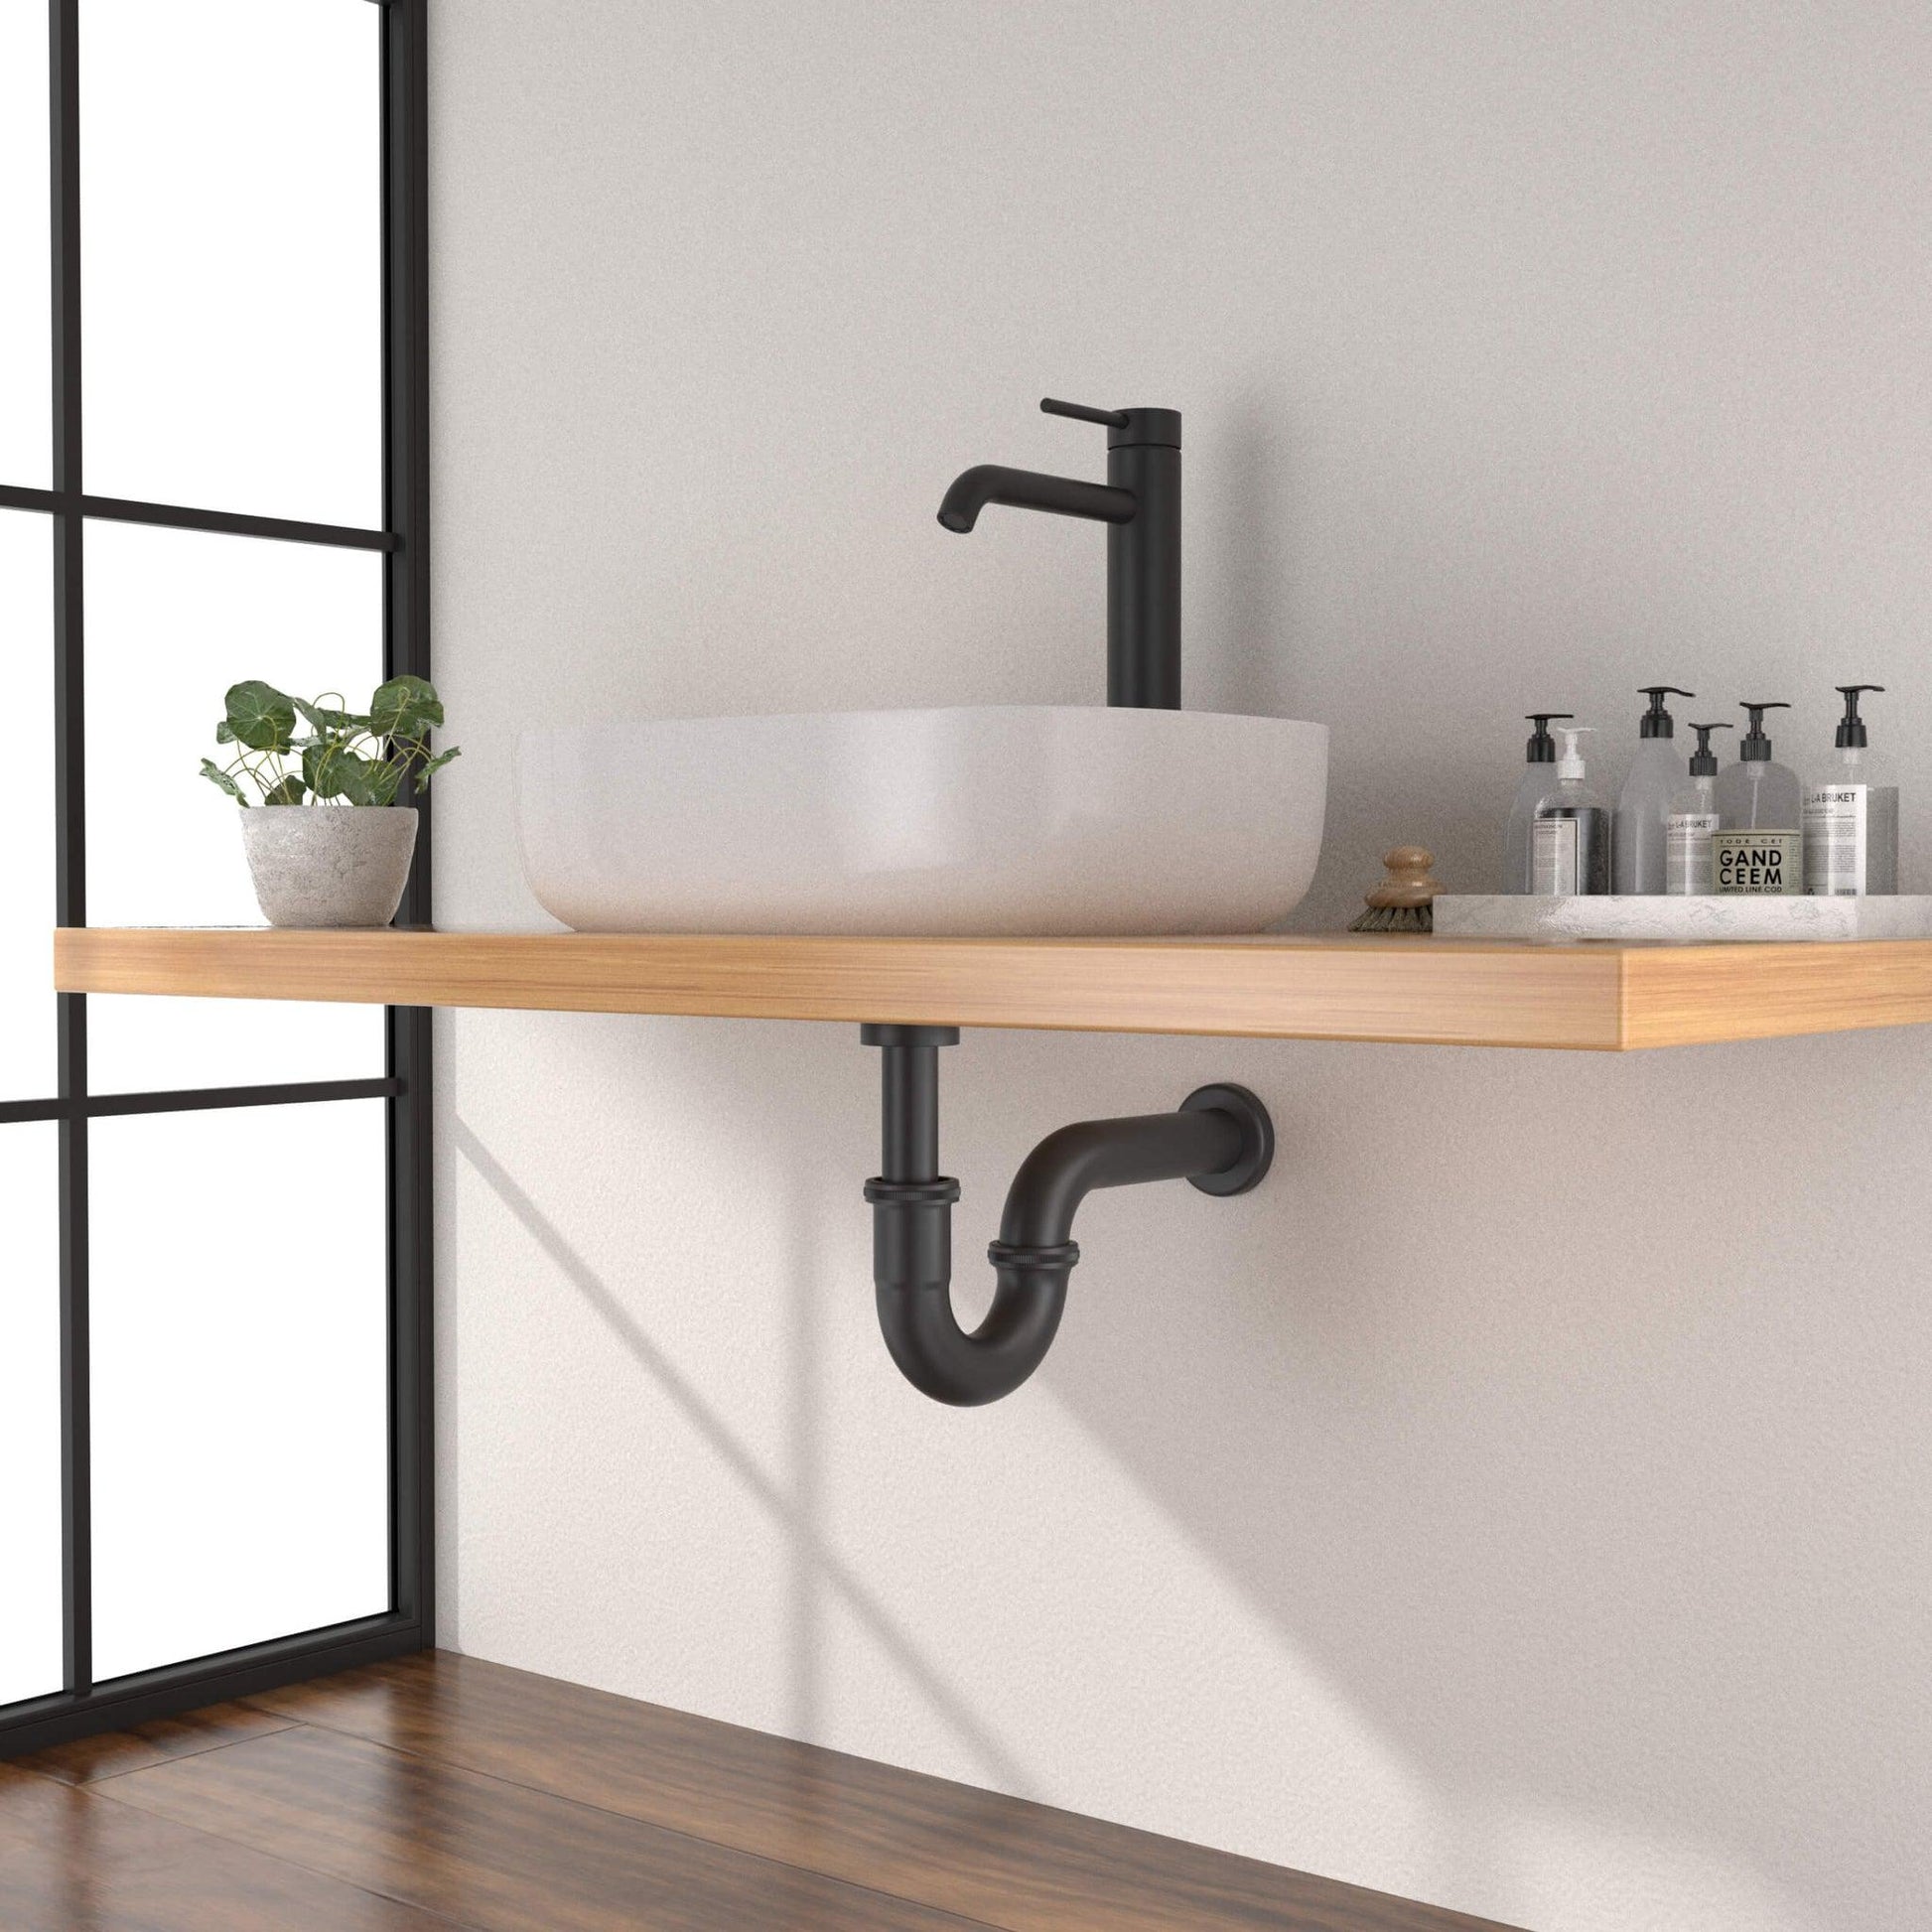 Birsppy Mixer Taps for Bathroom Basin Black Stainless Steel